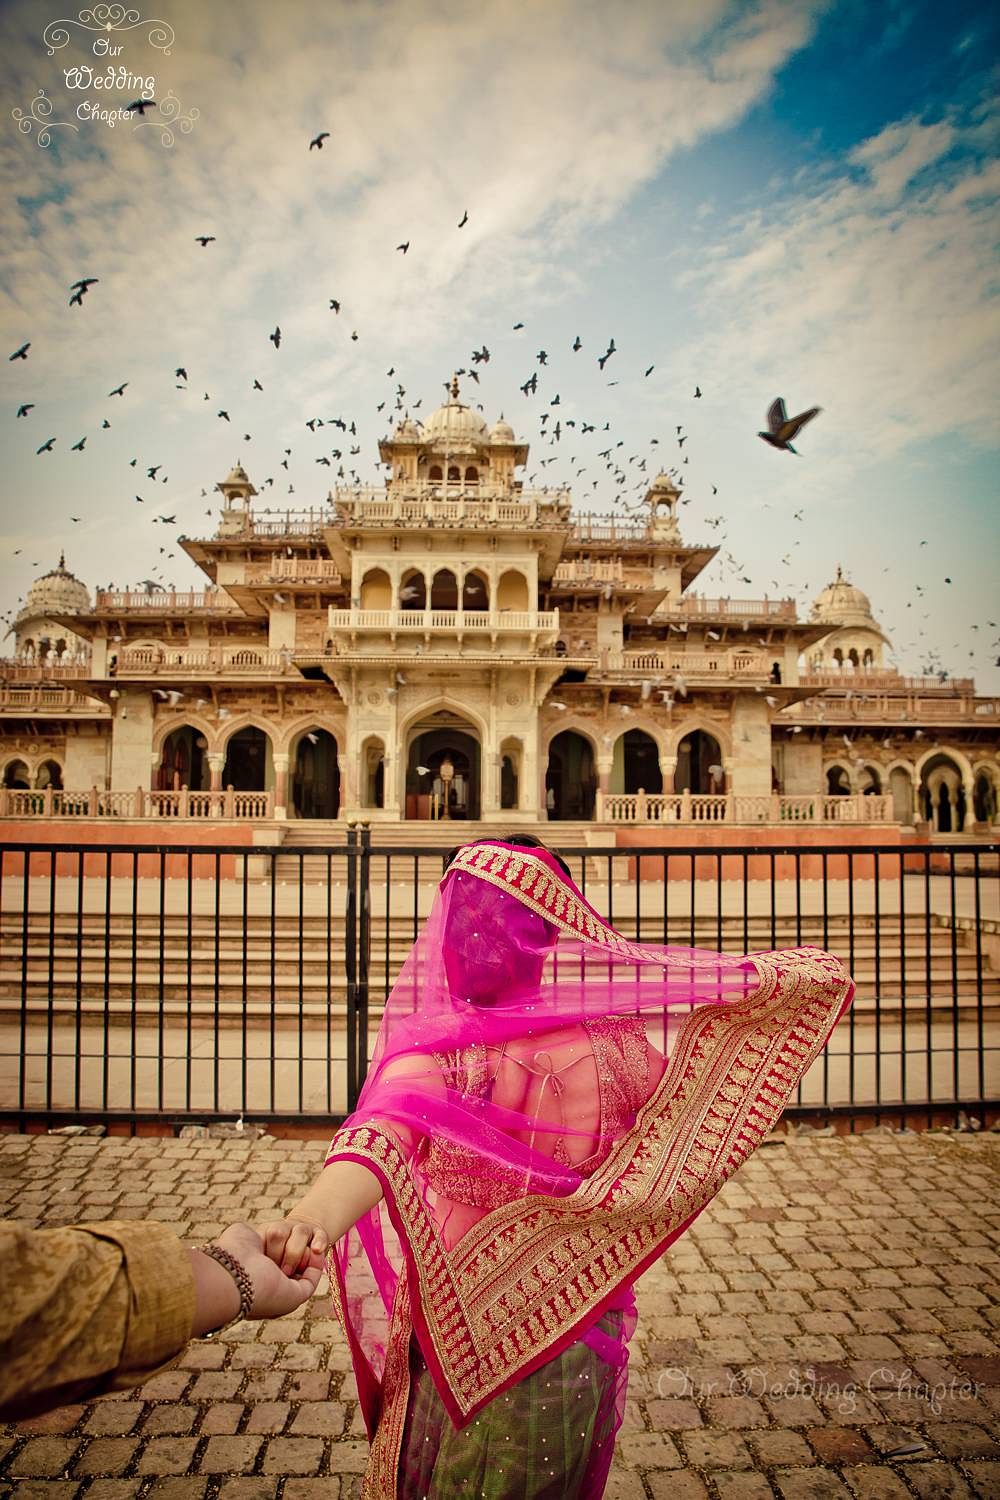 The couple visited Jaipur for some of their shots. This one looks familiar, doesn’t it? (Photo Courtesy: Our Wedding Chapter)